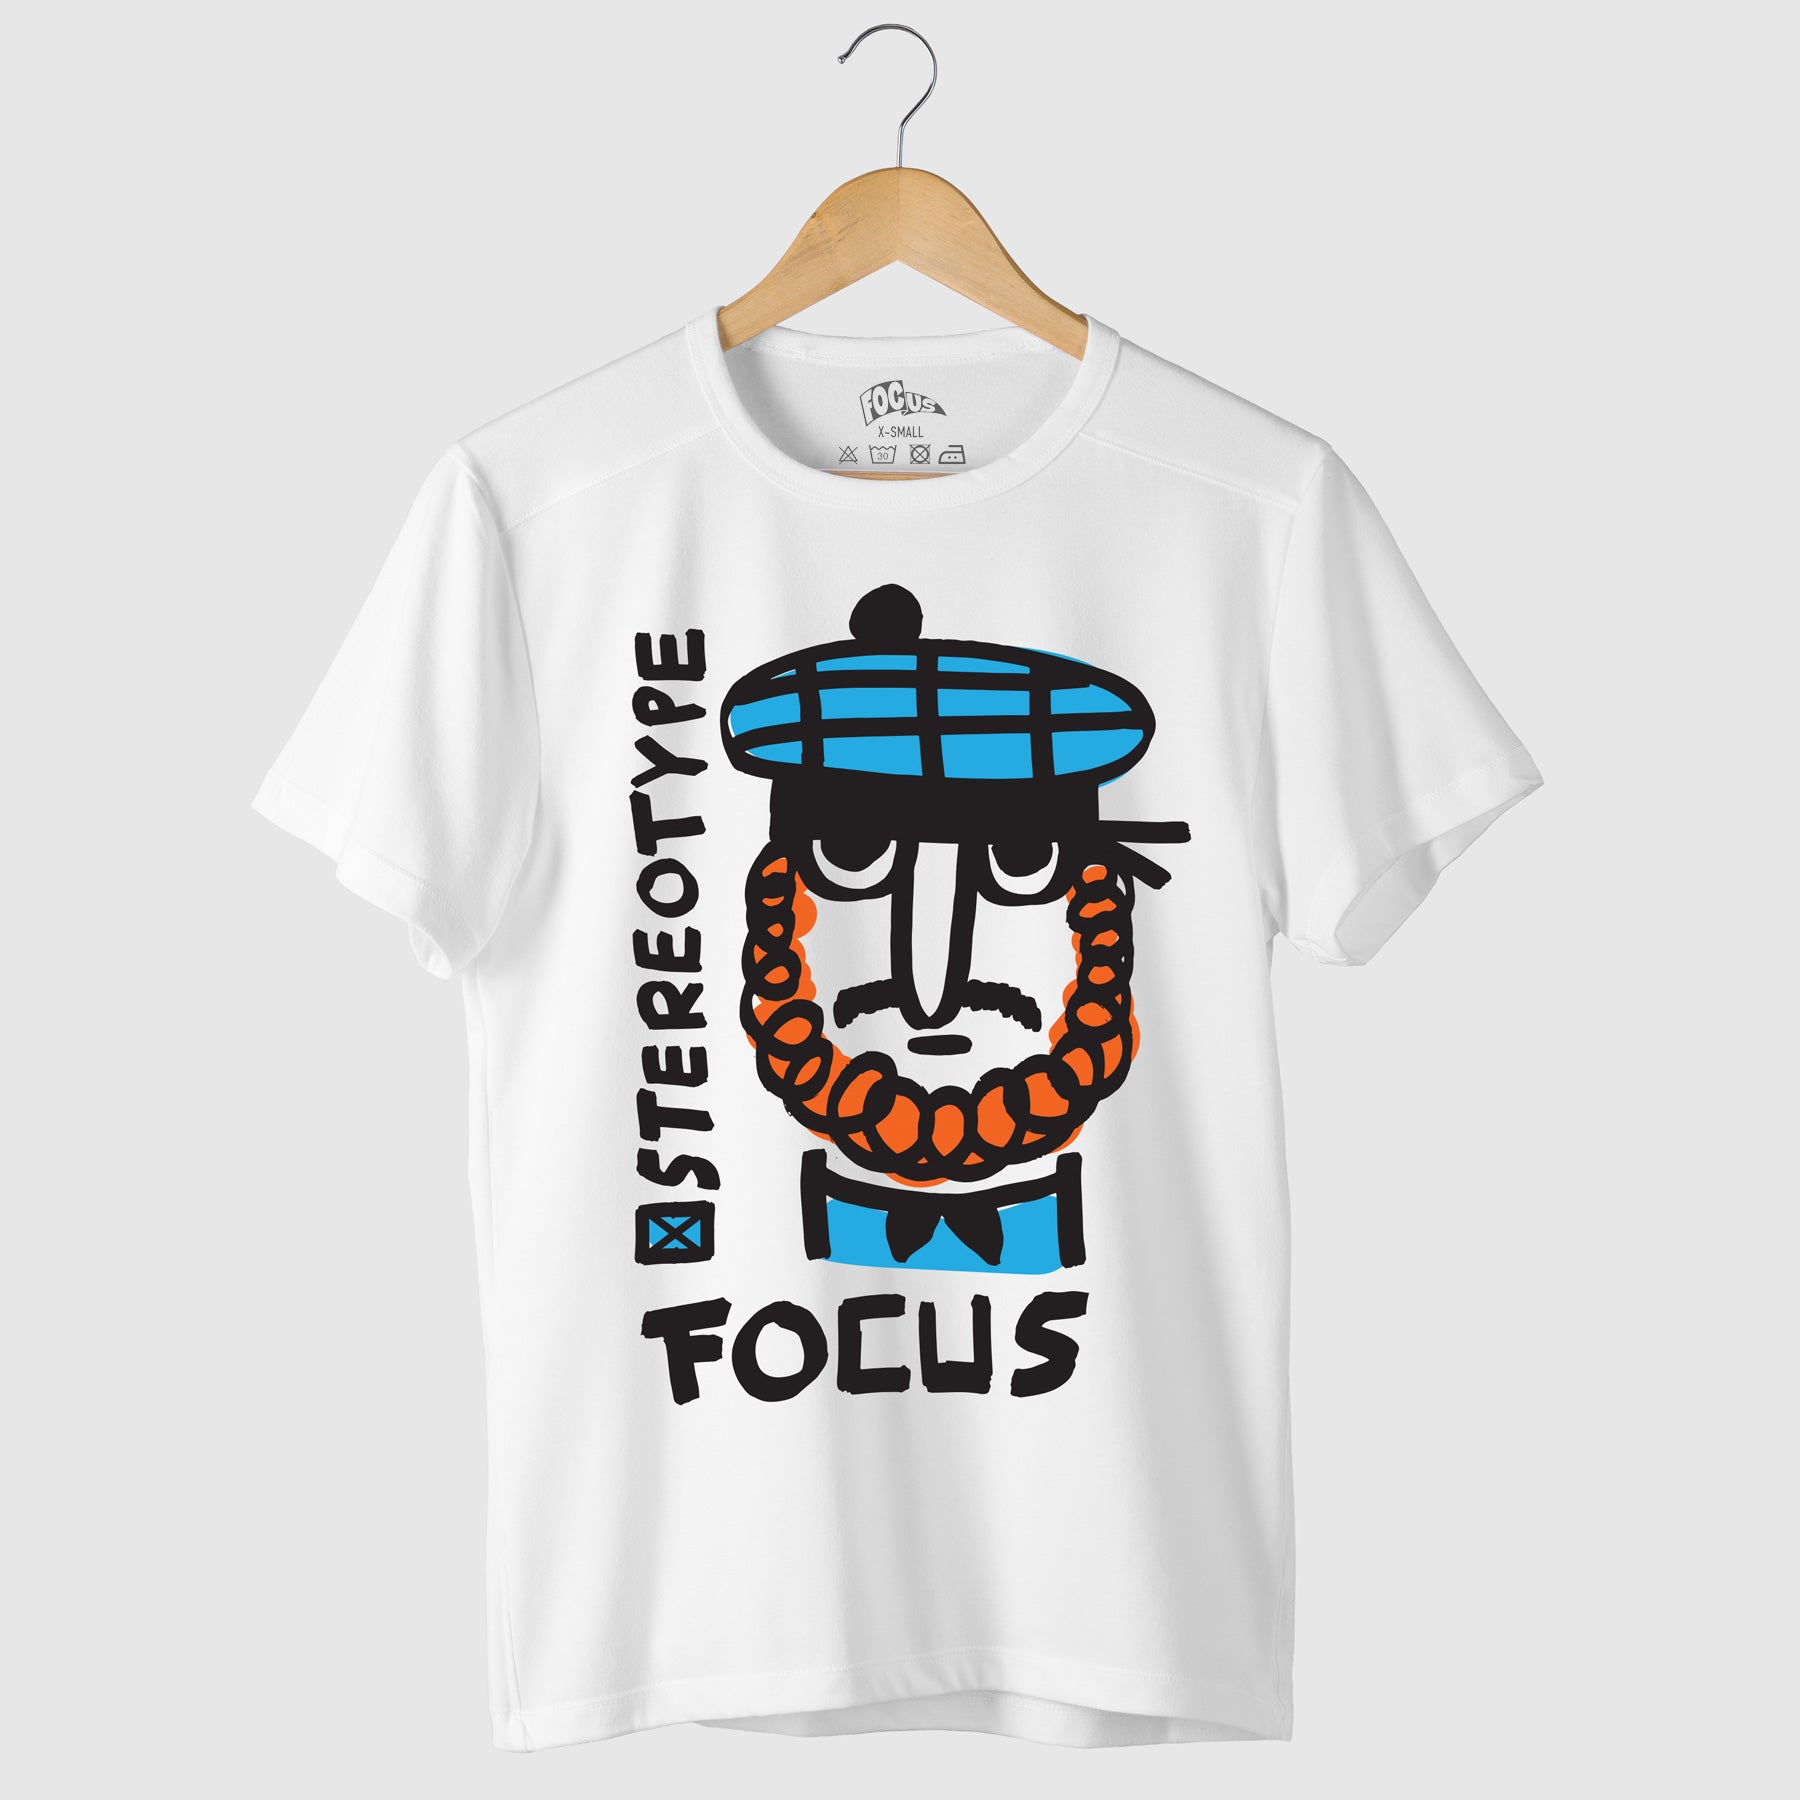 Focus Stereotype T-shirt - White